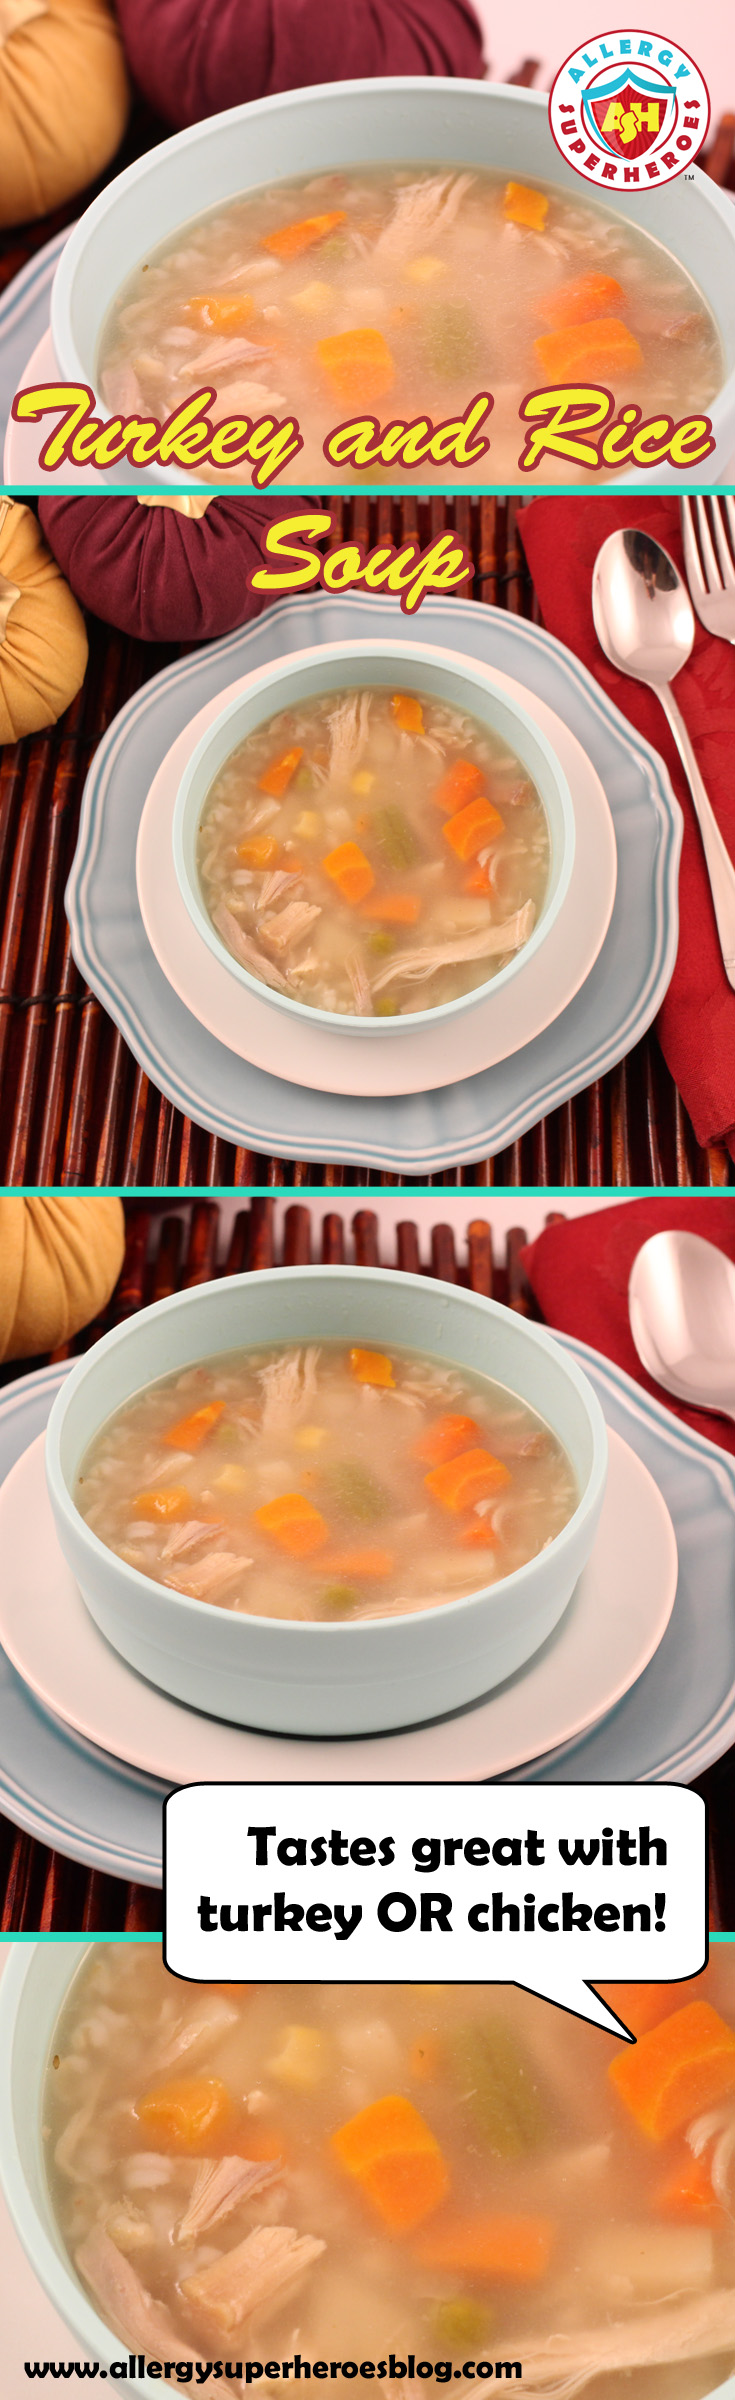 Turkey or Chicken and Rice Soup | Food Allergy Superheroes